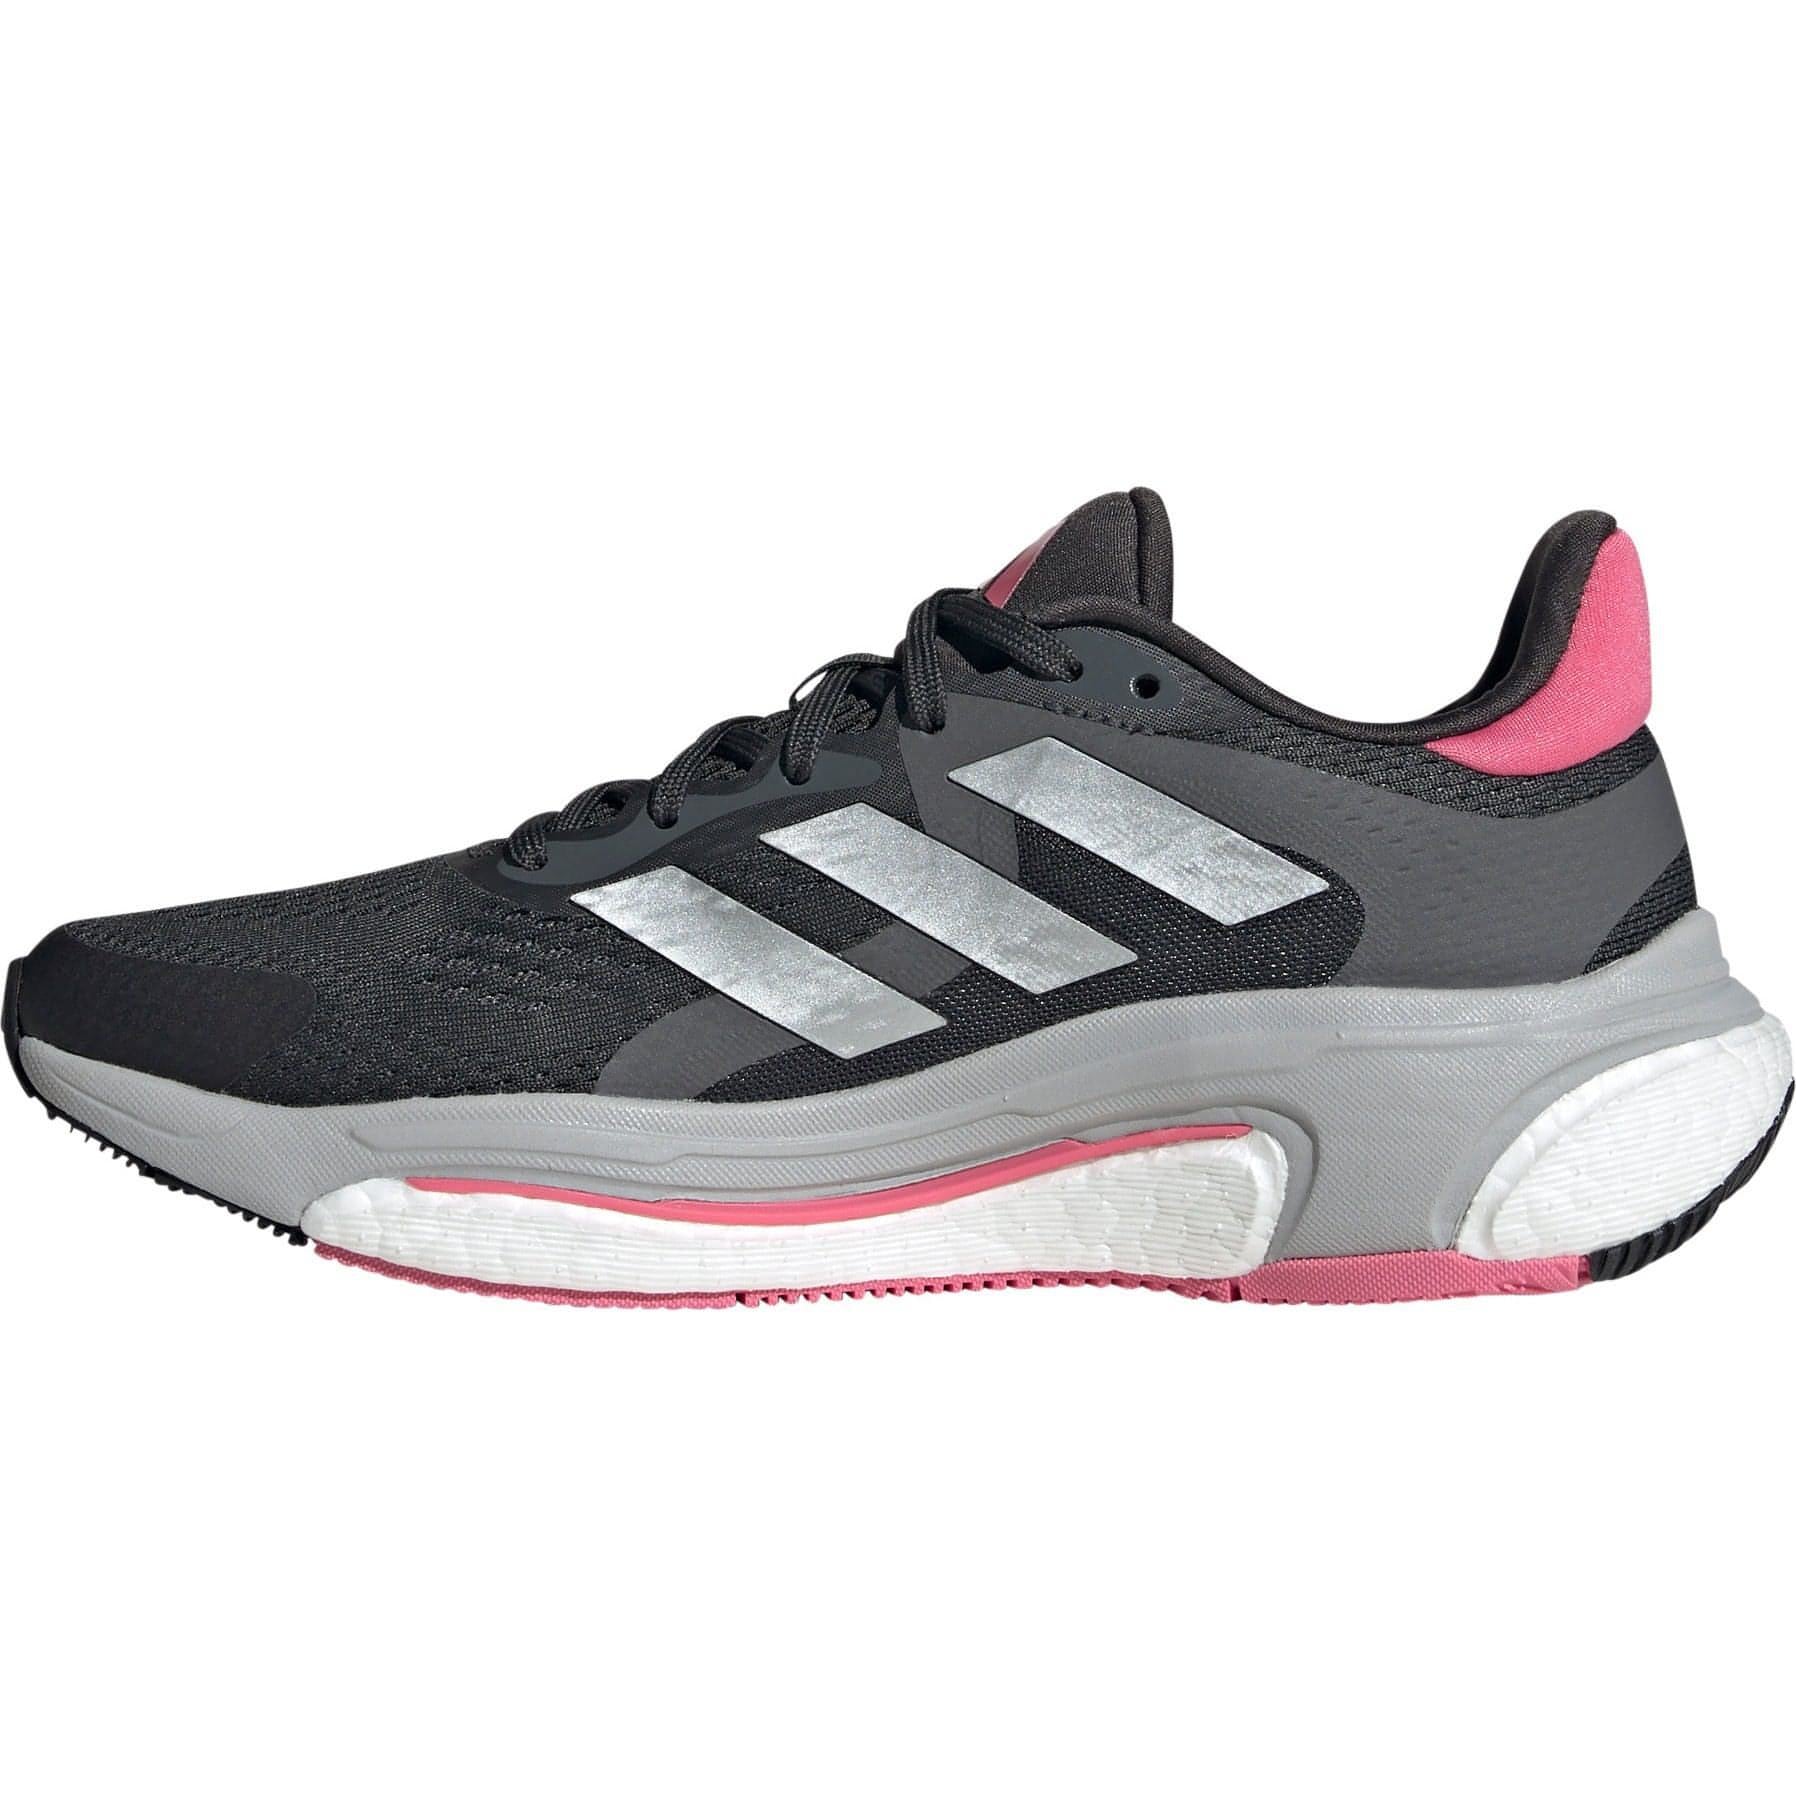 Adidas Solar Control Shoes Hp9651 Inside - Side View